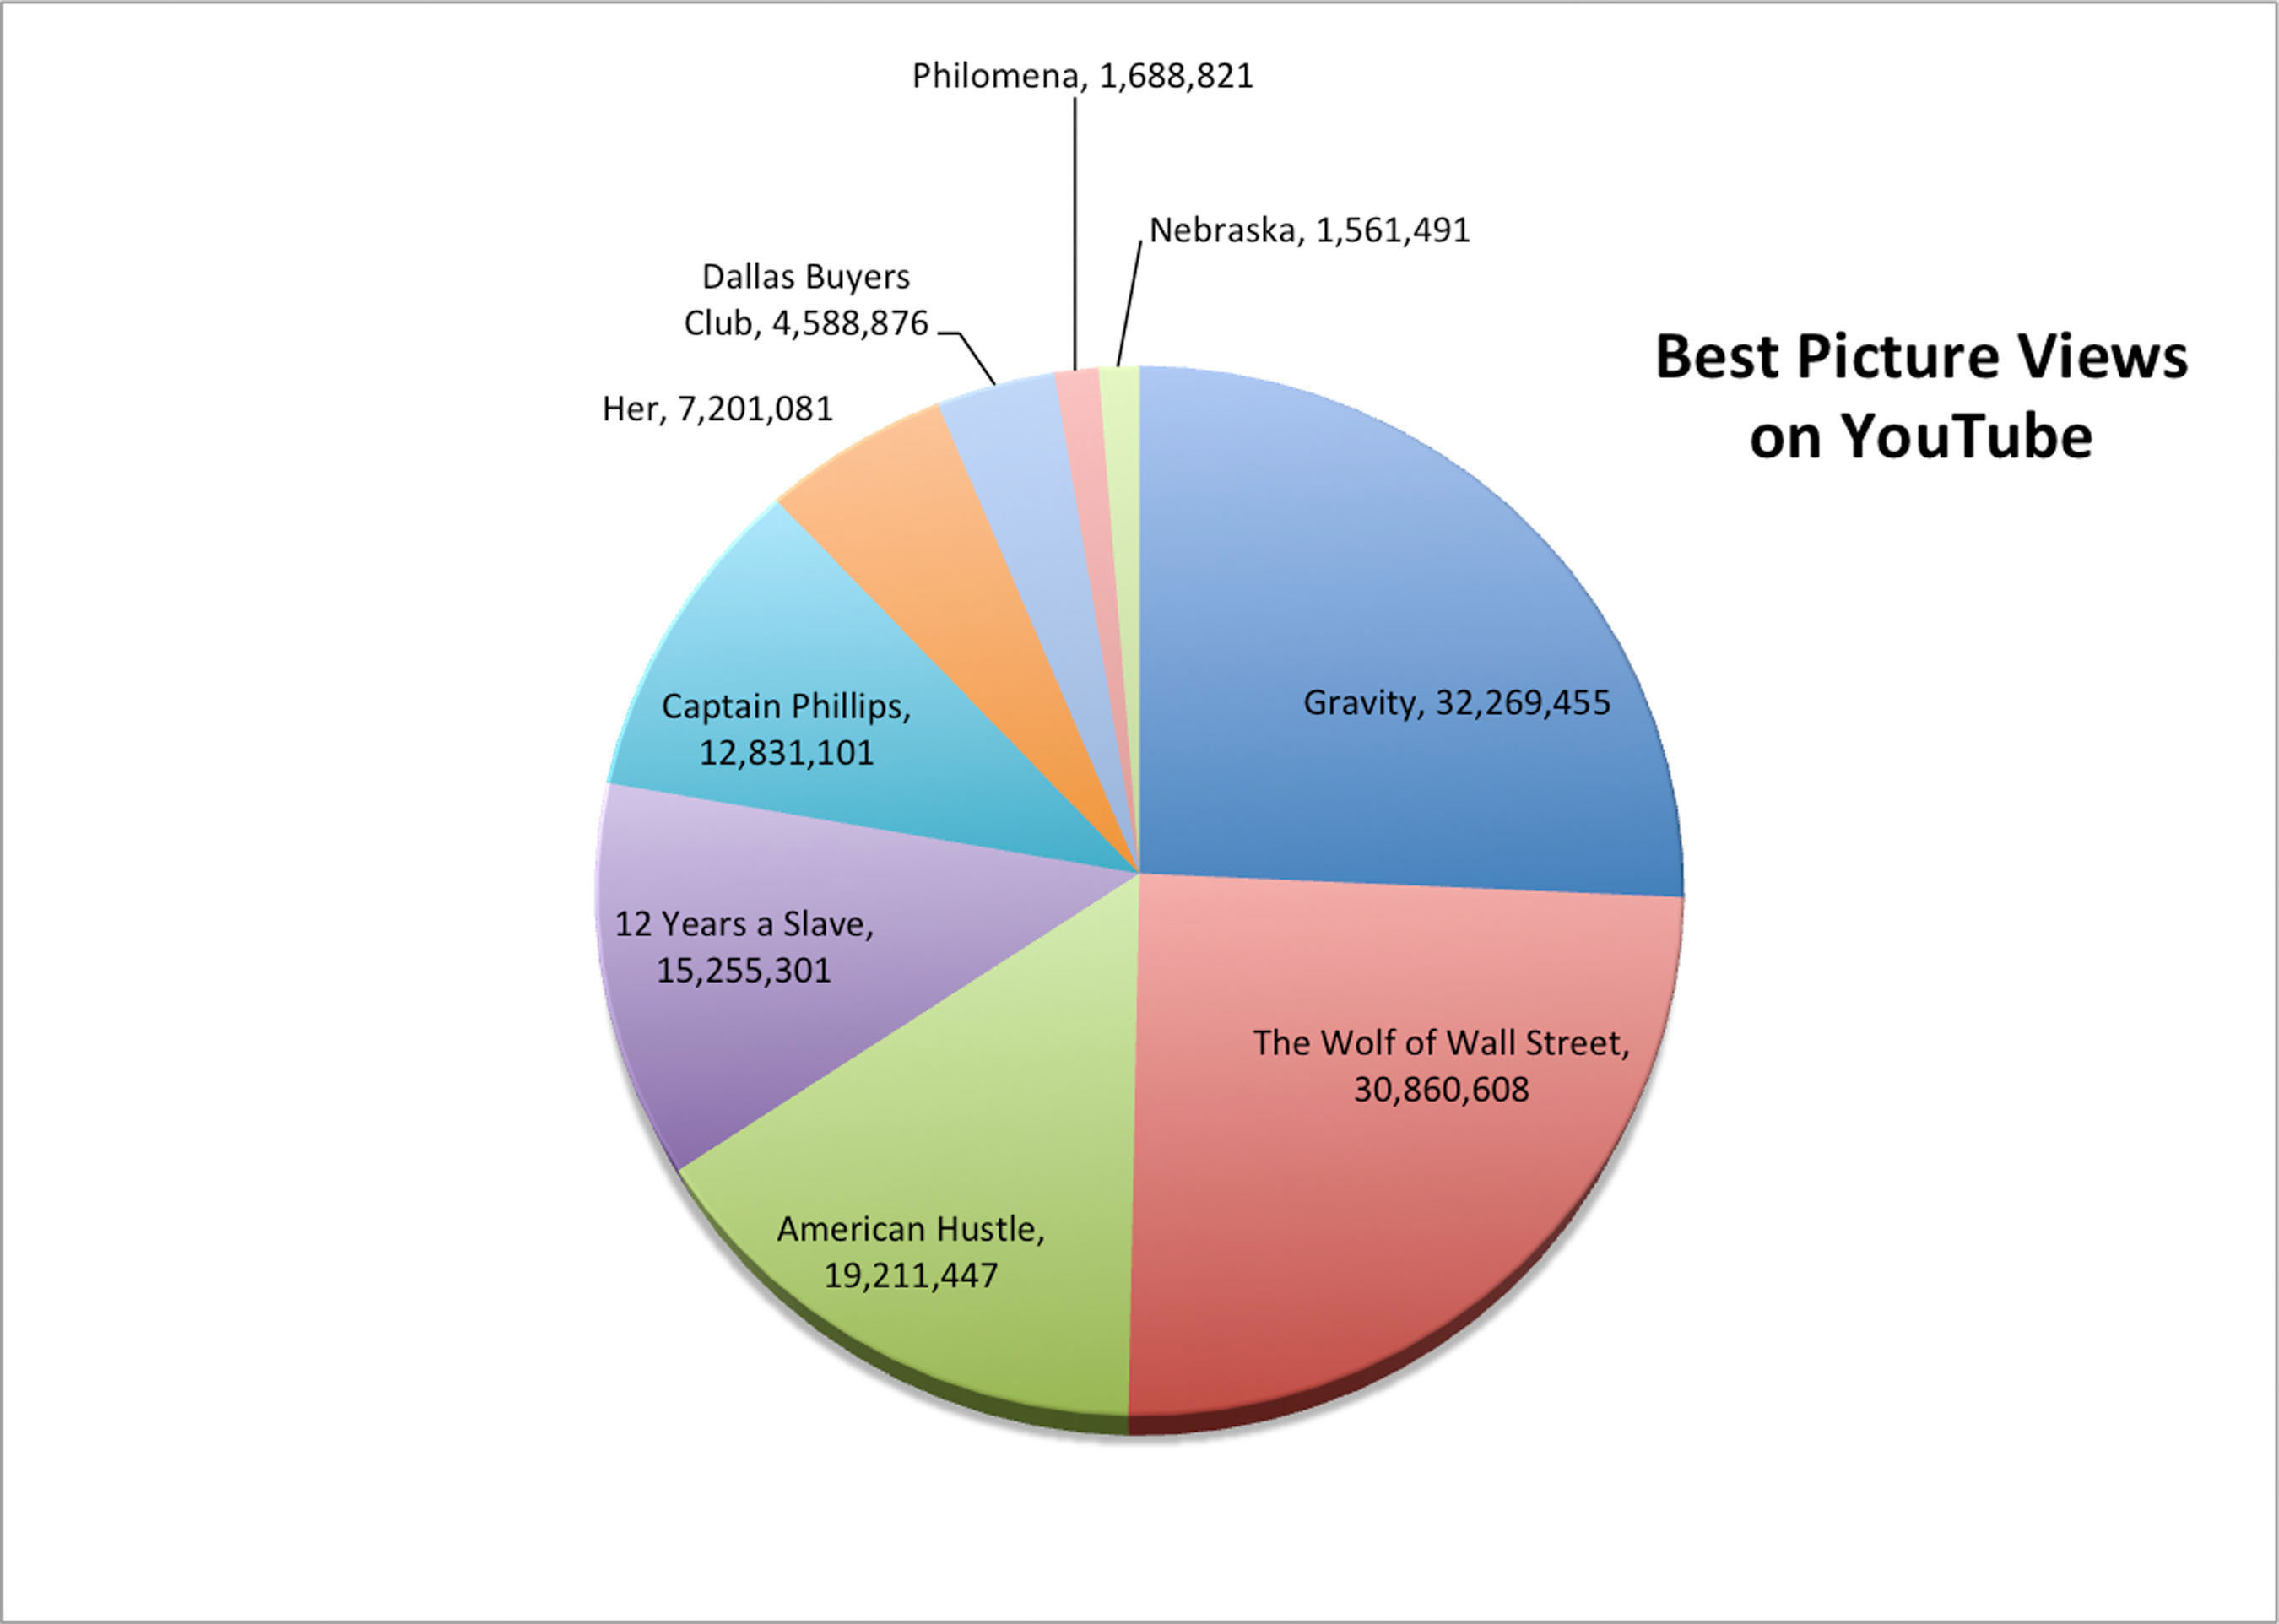 Graphic shows total YouTube video views for each Academy Awards nominated film for Best Picture. "Gravity" and "Wolf of Wall Street" top the charts with more than 30 million video views a piece. Video views include trailers, film clips, reviews, interviews, behind-the-scenes clips and fan videos. Research is the latest from the Touchstorm Video Index, which gives YouTube channel owners insights on how effectively they're building audiences on YouTube. For more information and to access recent reports visit  www.touchstorm.com . To view the top 10 videos from each of the major Academy Awards categories, visit  www.youtube.com/touchstorm . (PRNewsFoto/Touchstorm) (PRNewsFoto/TOUCHSTORM)